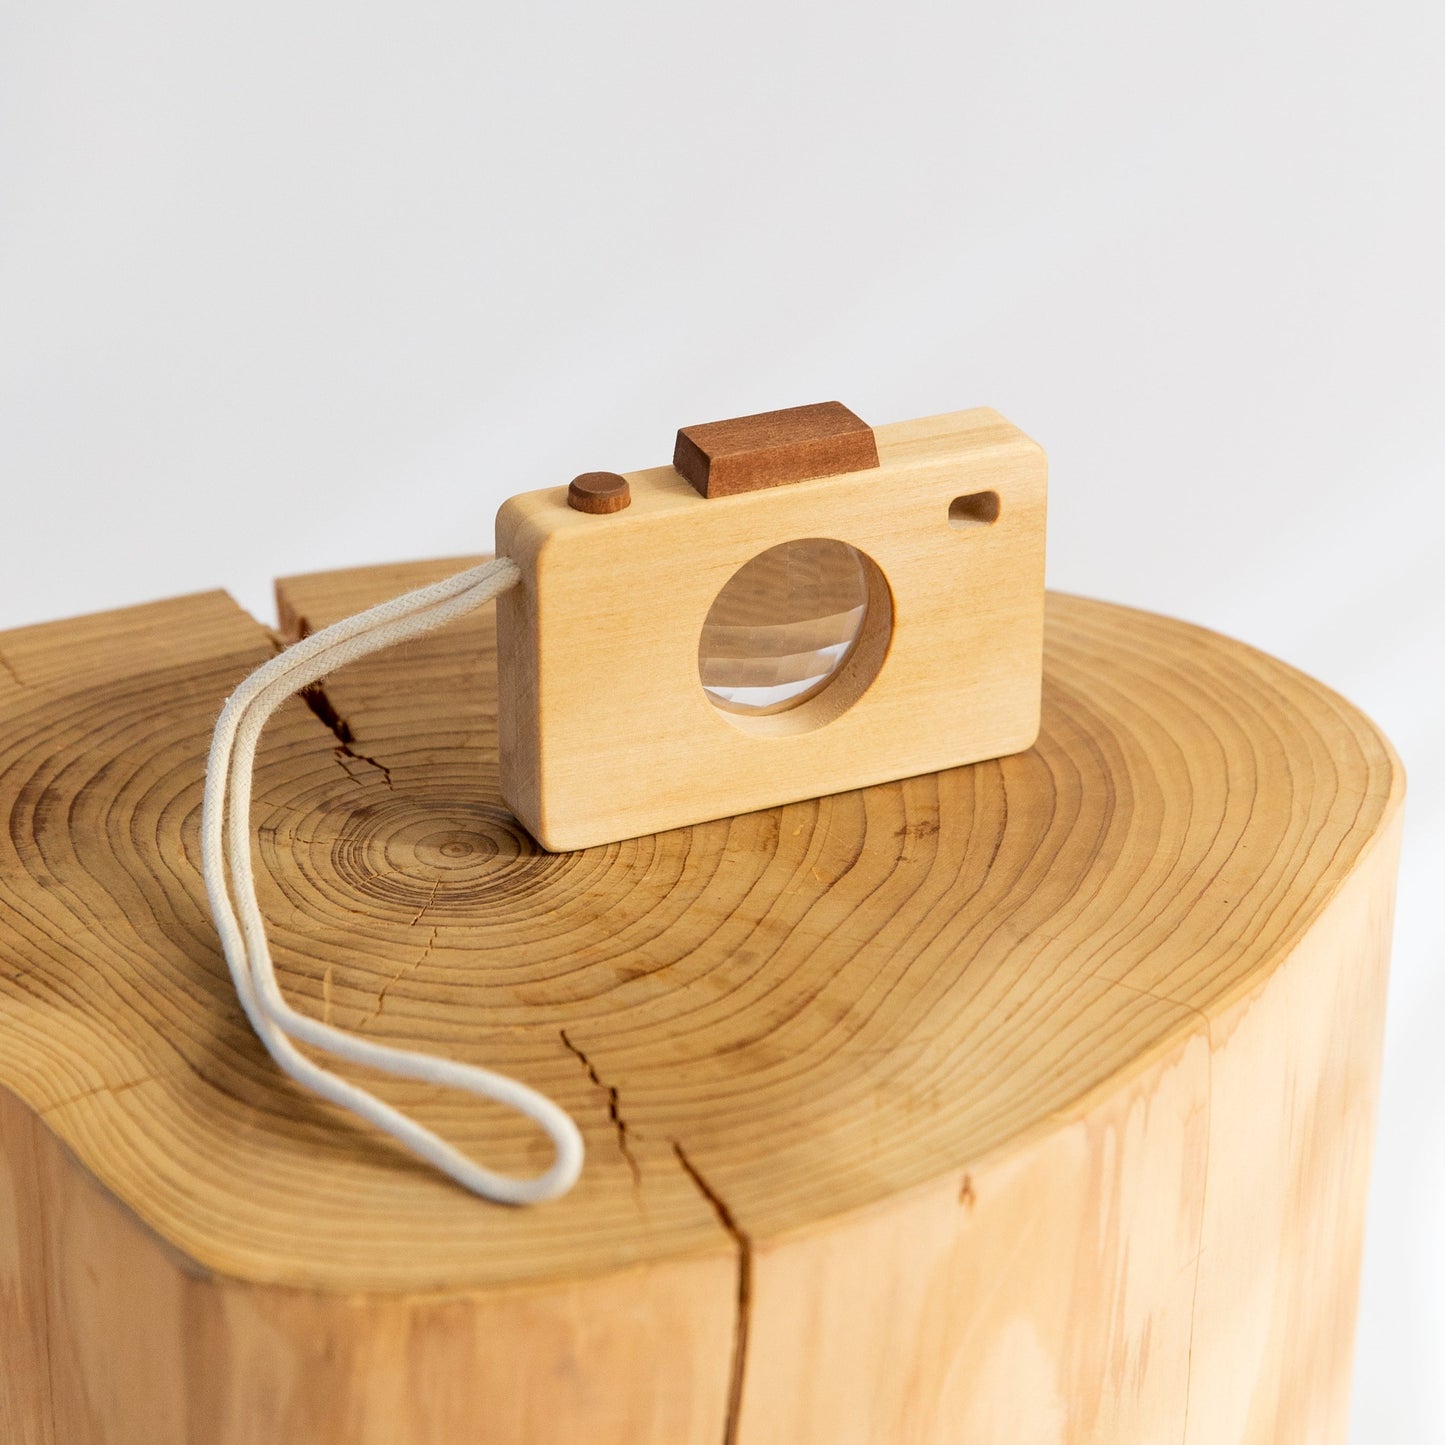 Wooden Toy Camera by Avdar